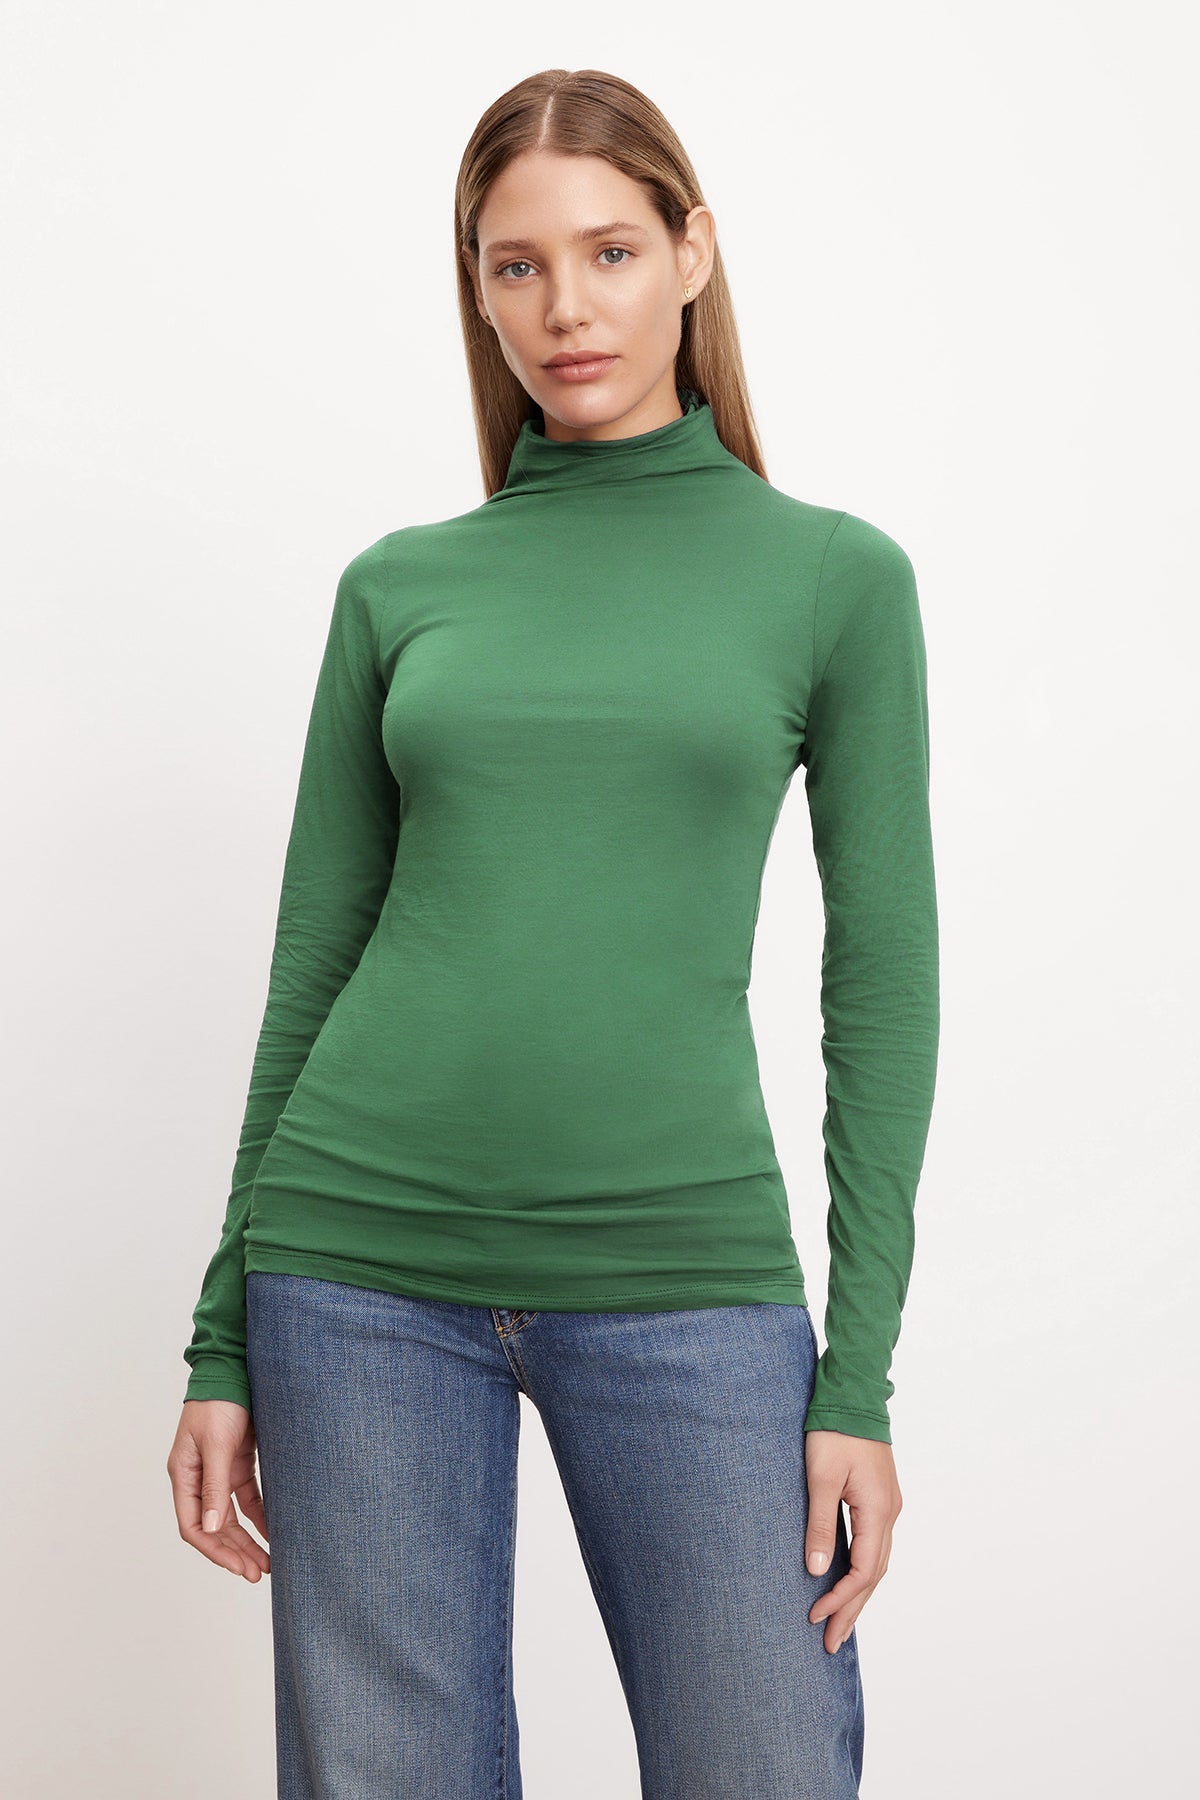 A woman donning a green Velvet by Graham & Spencer TALISIA GAUZY WHISPER FITTED MOCK NECK TEE, a wardrobe staple in the fashion world. She pairs it with jeans for a casually chic look.-36001491419329